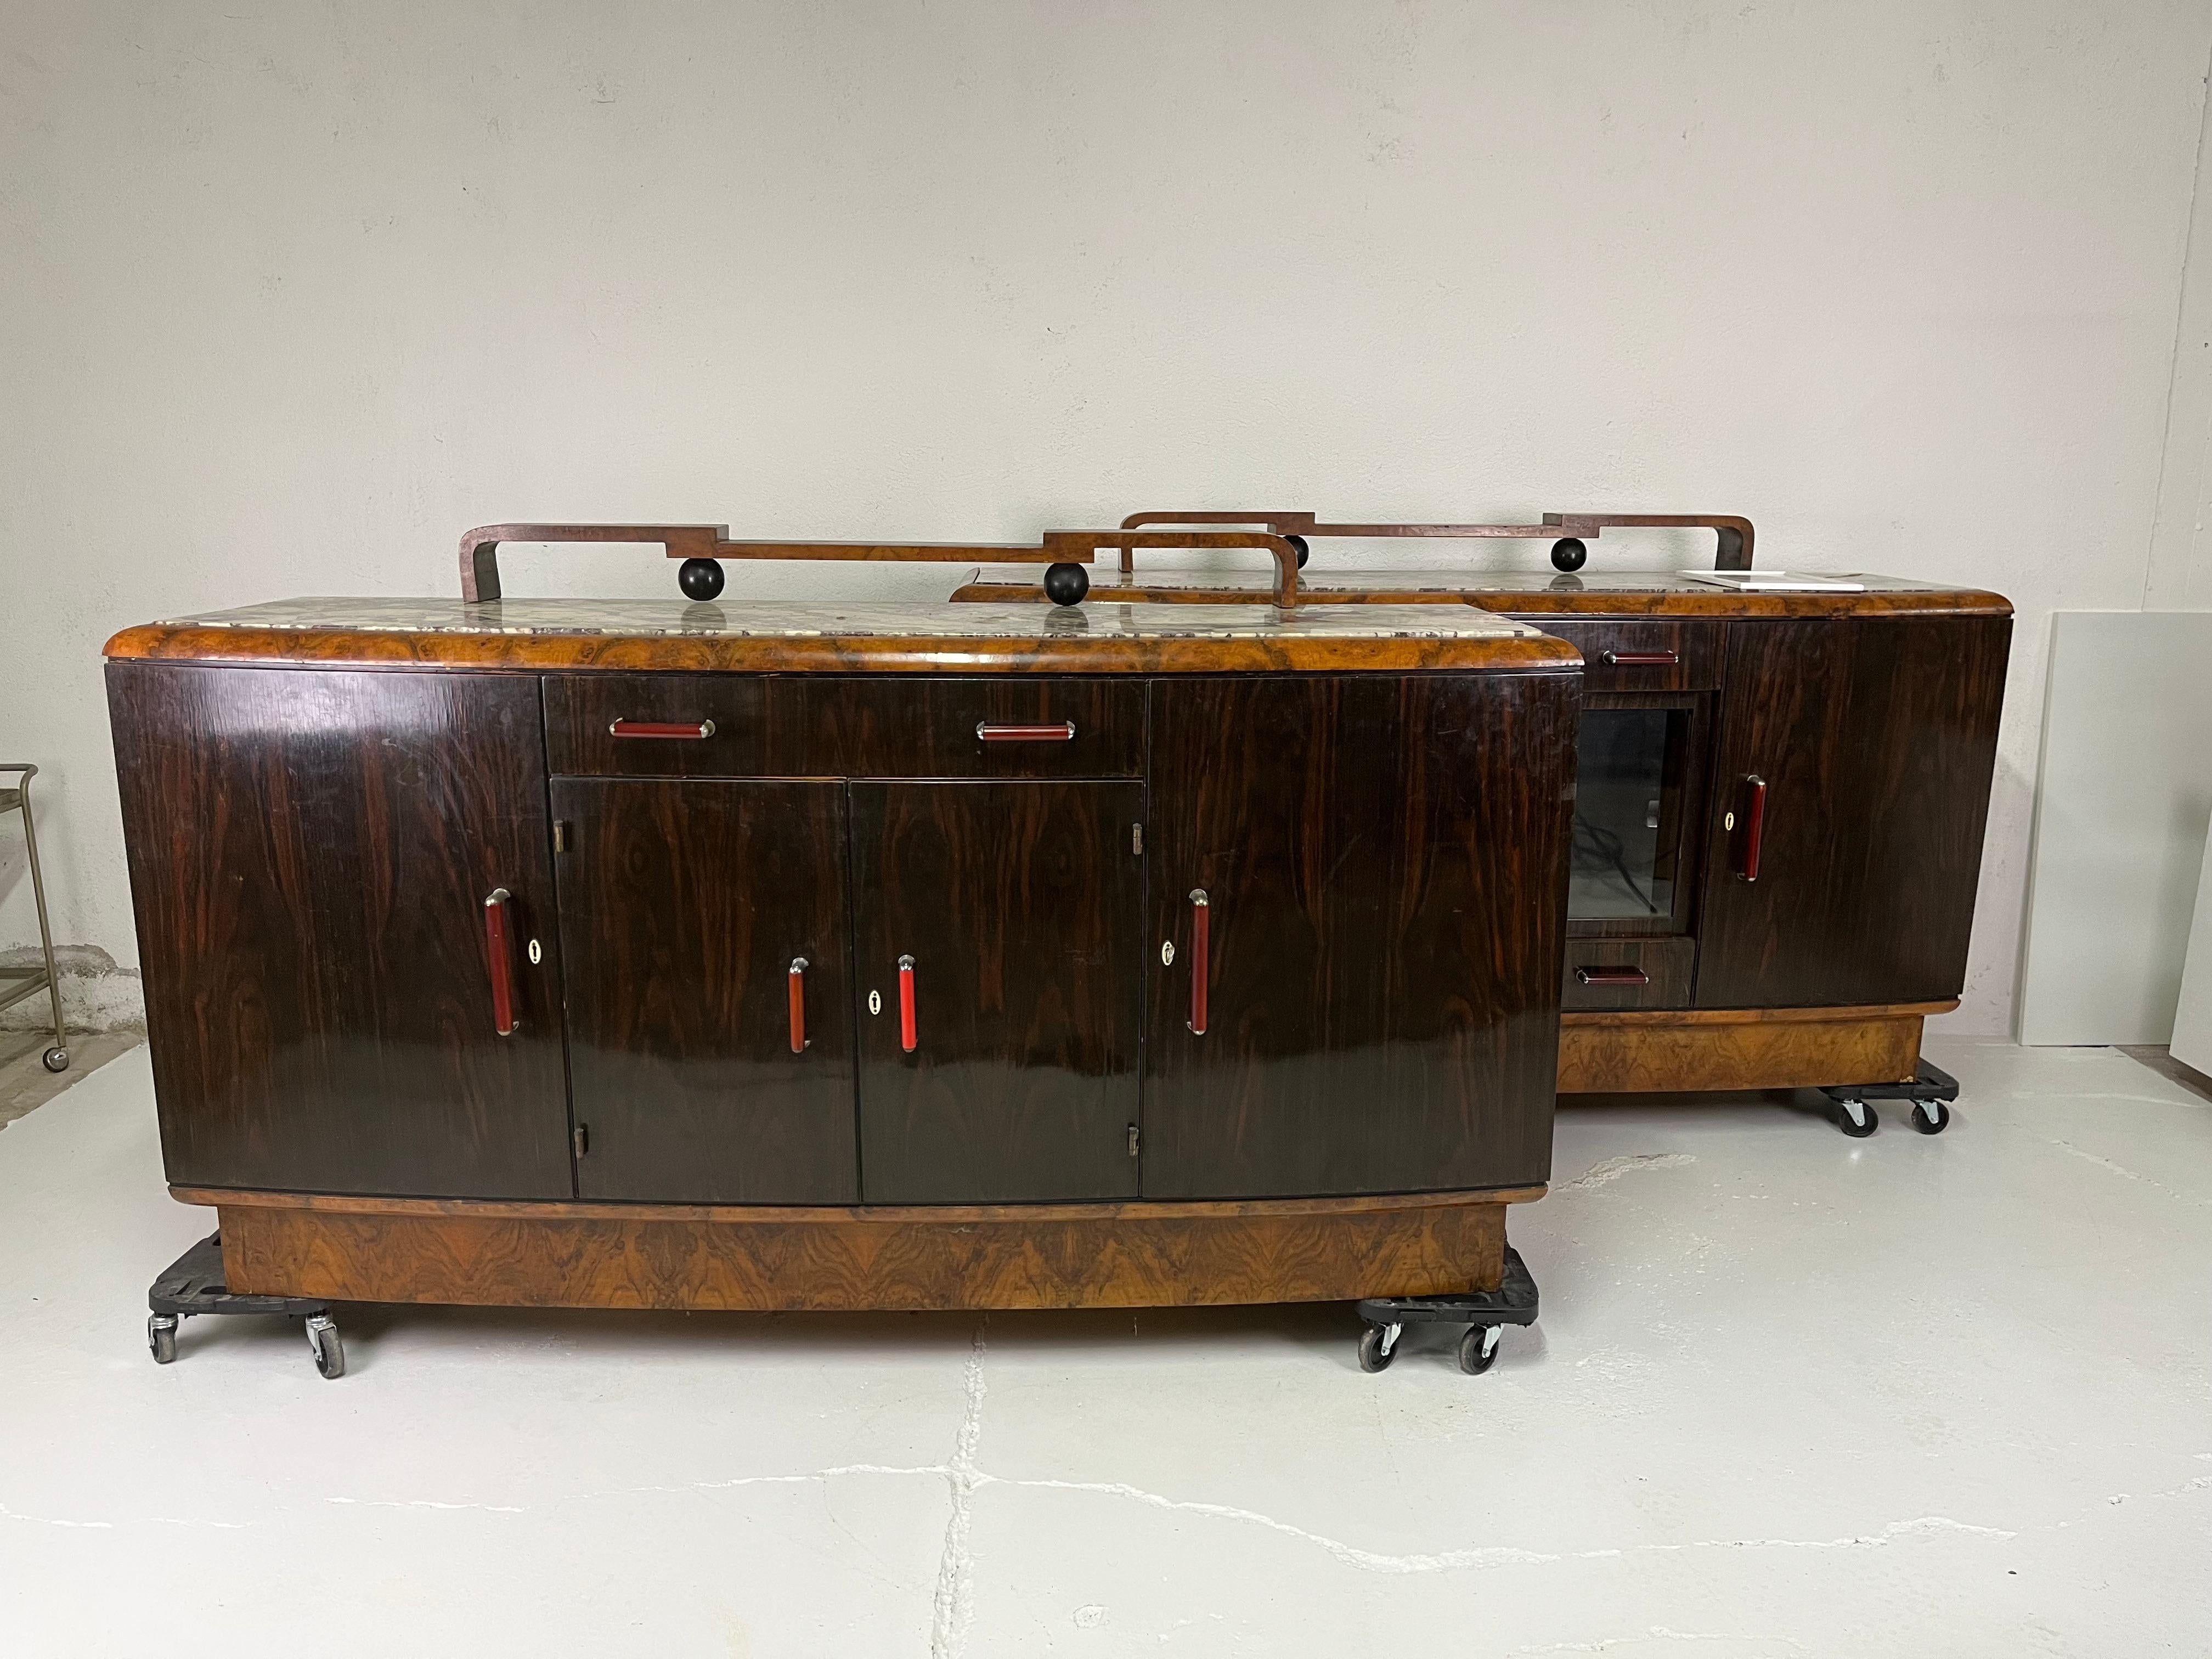 Pair of sideboards in briarwood, marble and Bakelite designed by Gaetano Borsani for Atelier di Varedo in the 1930s.

The sideboards are in good overall condition, considering that they are almost 100 years old, they may need some minor restoration